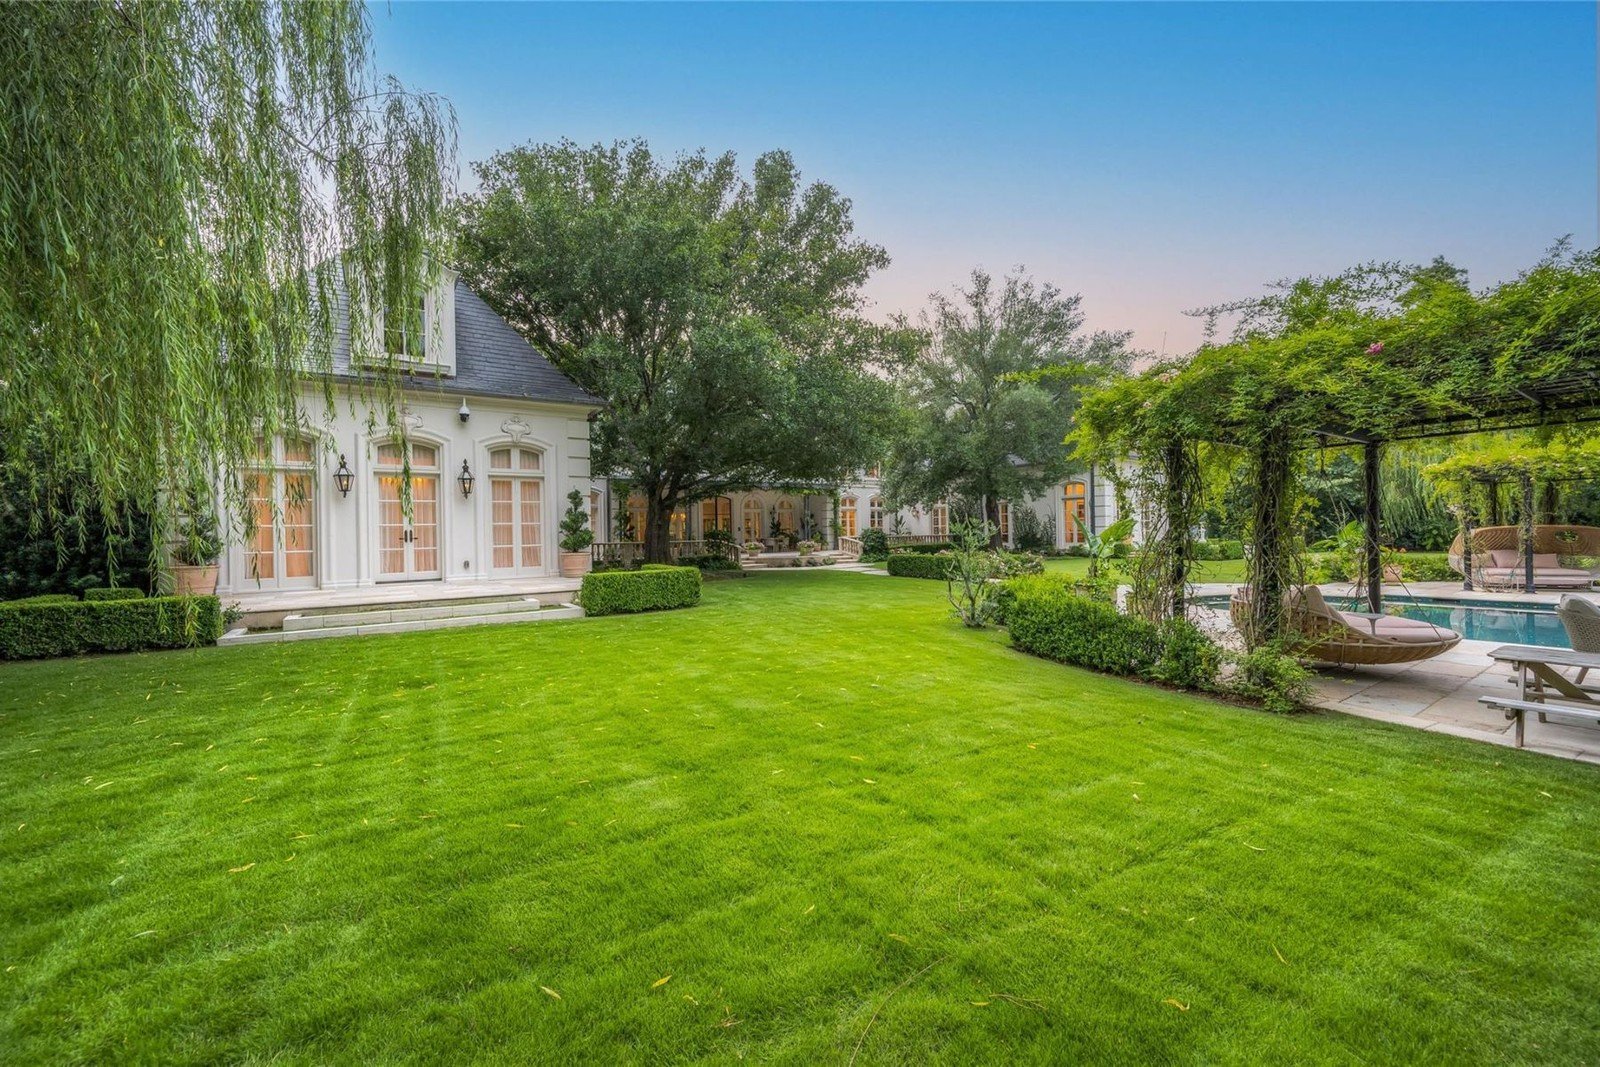 Francis York French Chateau-Style Mansion in Houston, Texas m00050.jpeg